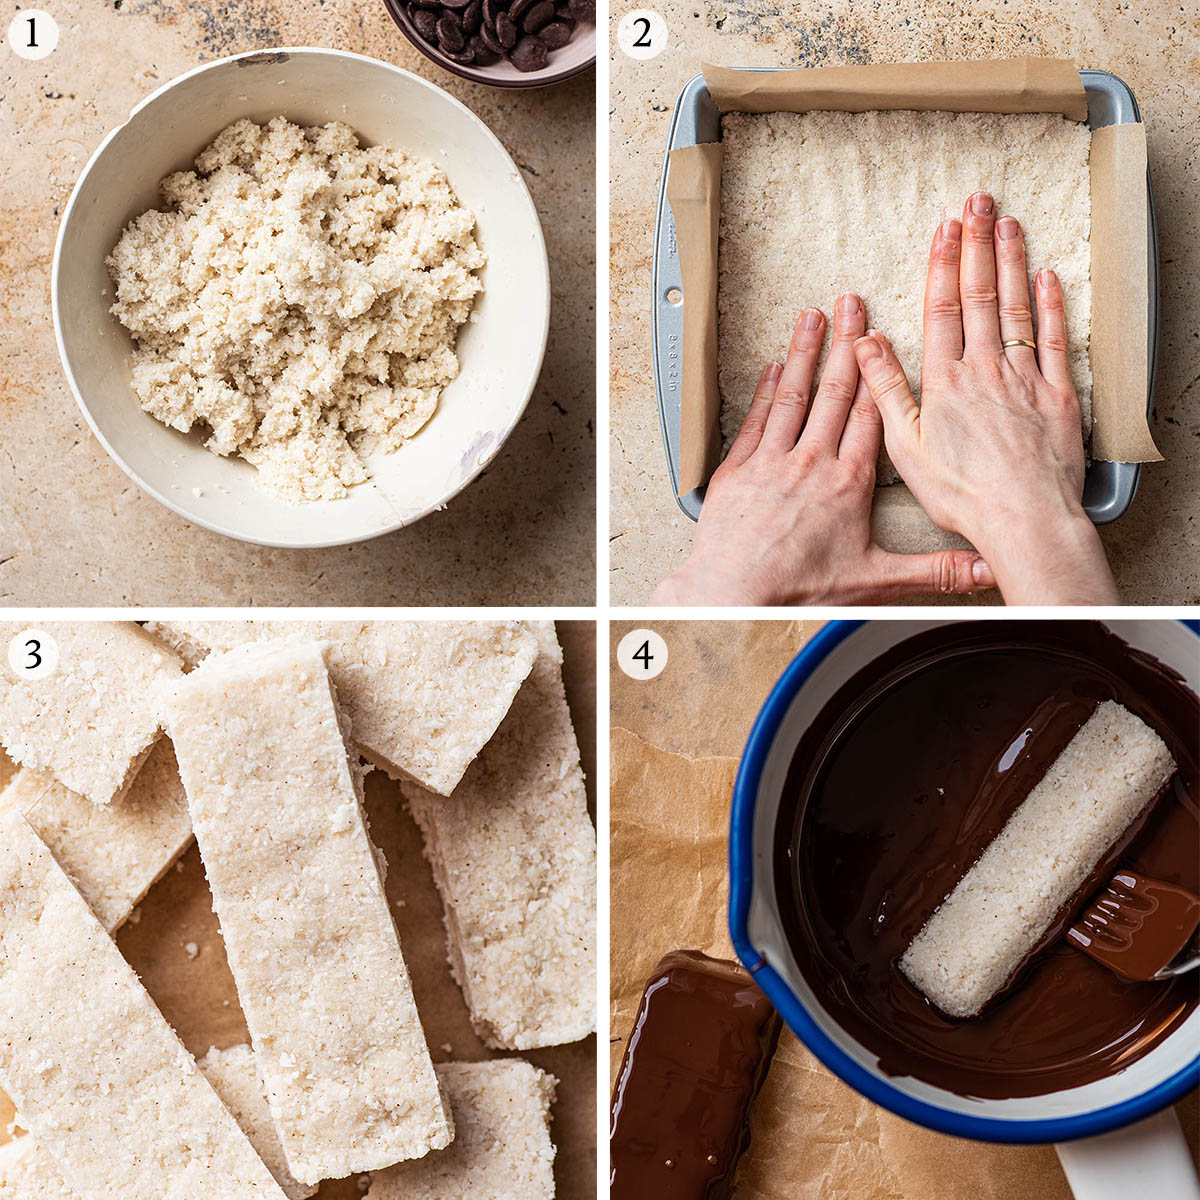 Coconut bars steps 1 to 4.